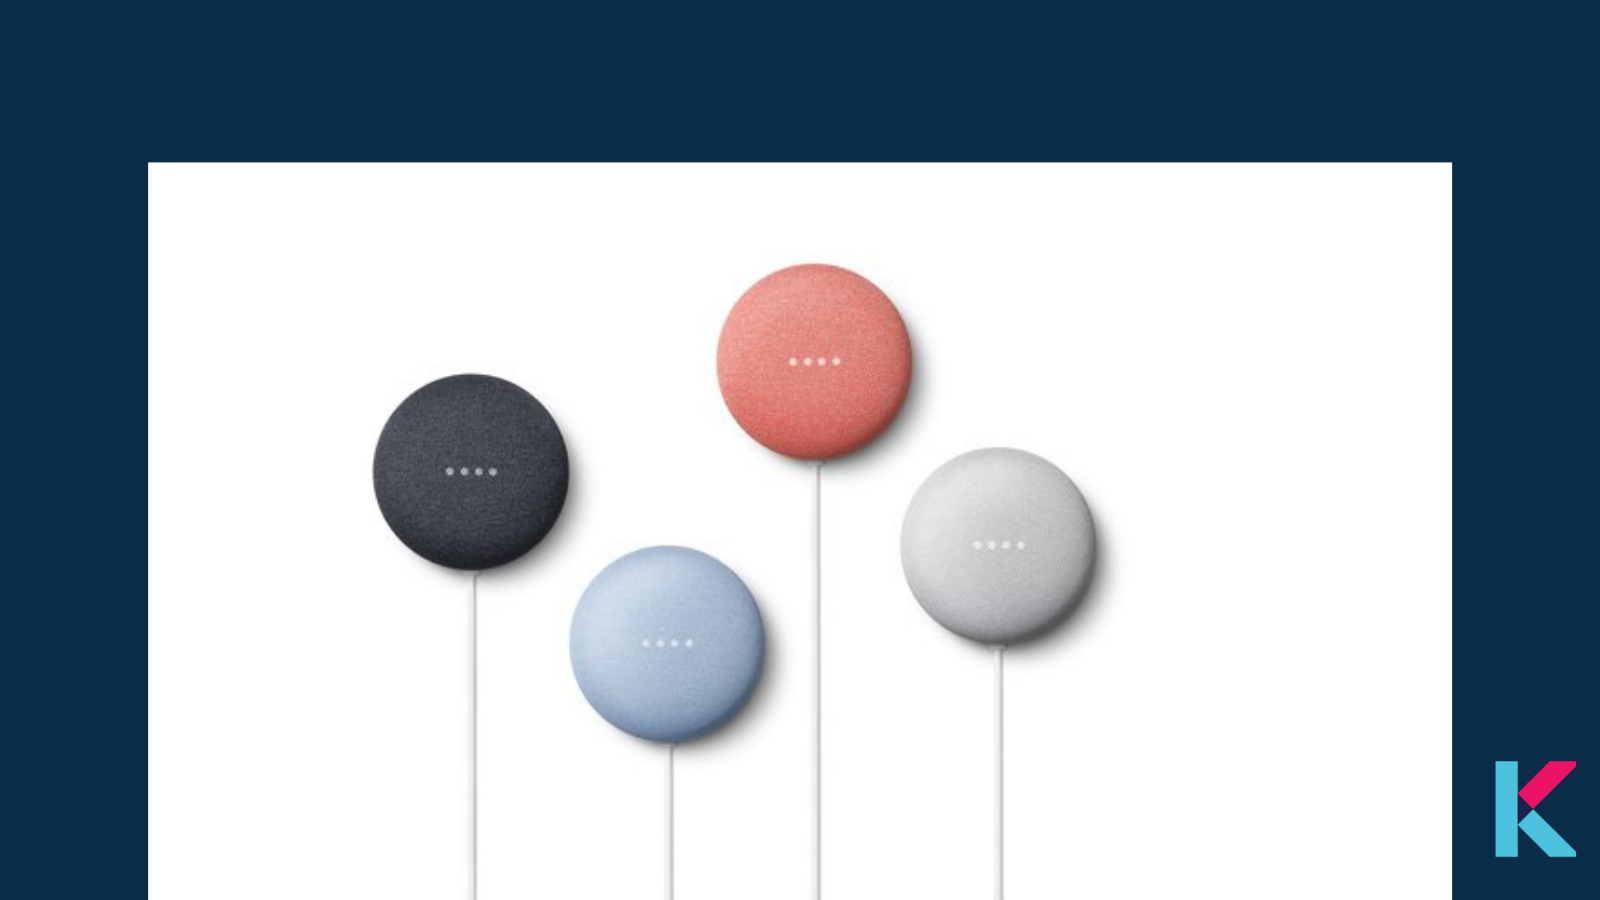 Google Nest Mini is a multipurpose smart speaker with many colors